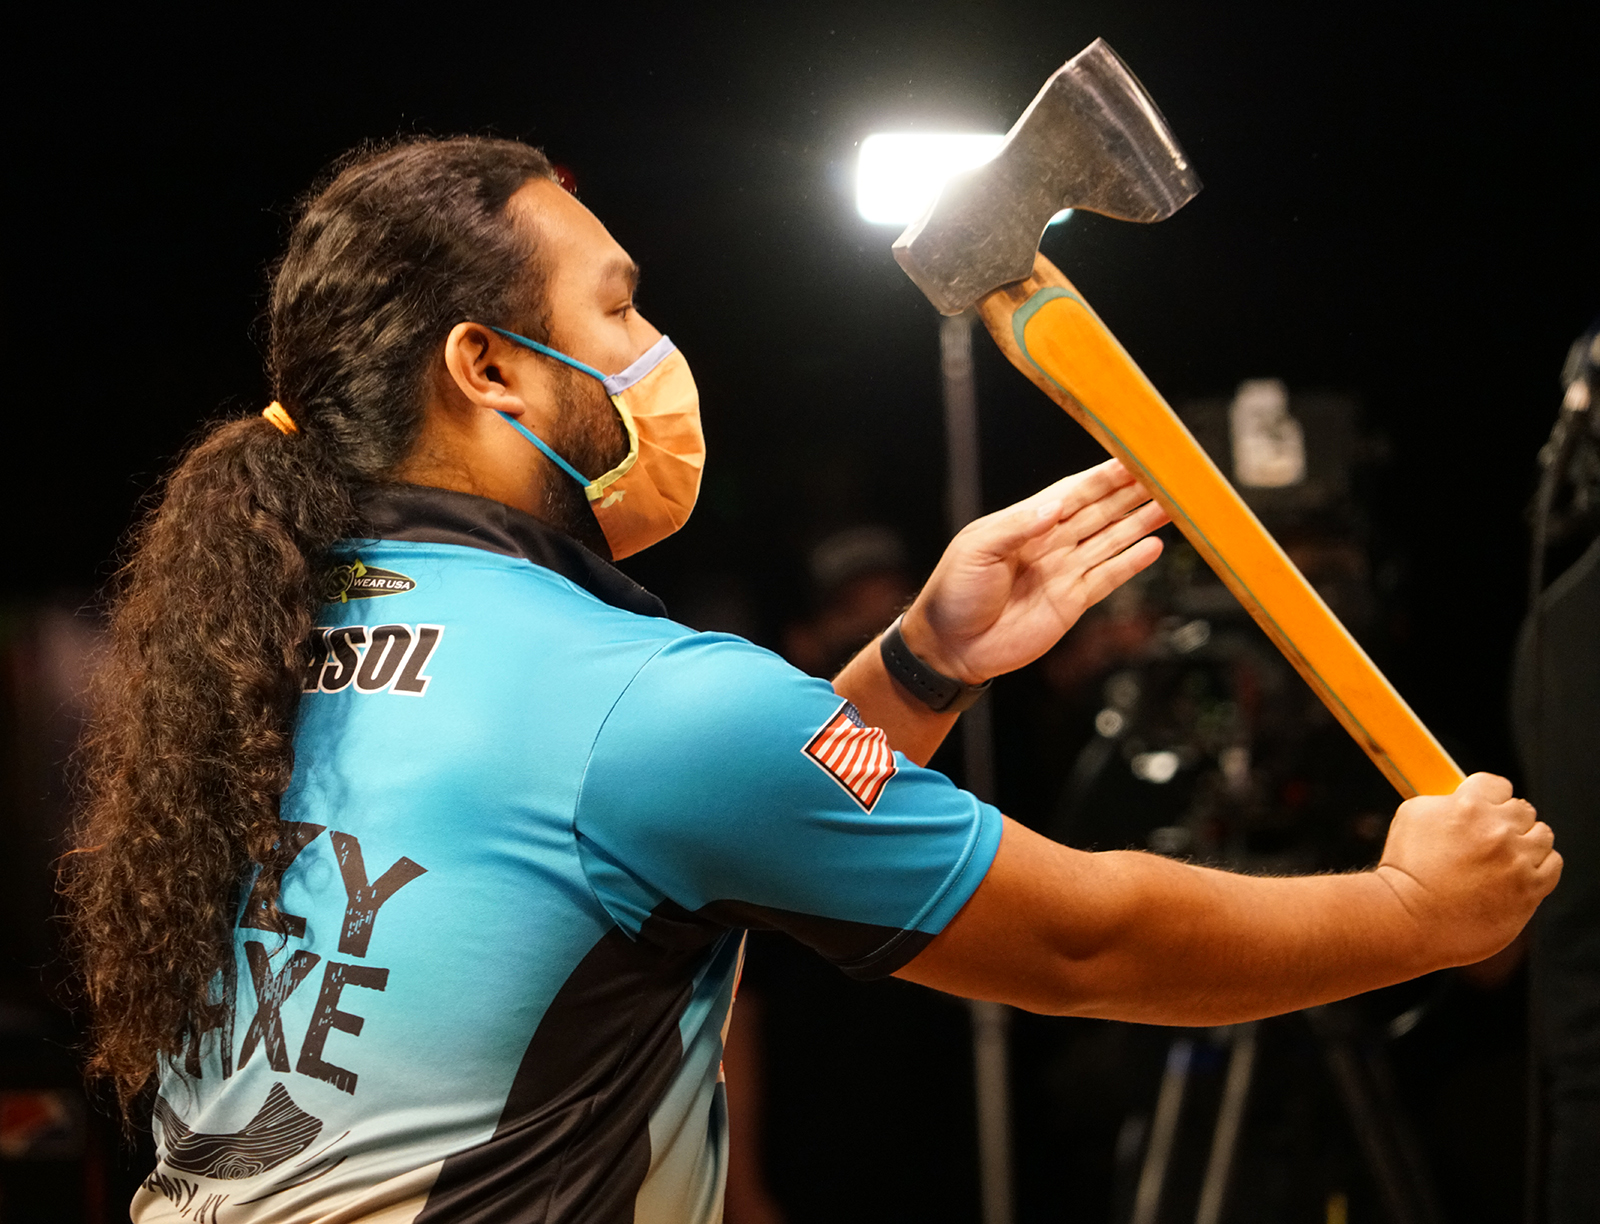 Mark Mirasol gets ready to throw an axe at the 2021 World Axe Throwing Championship.